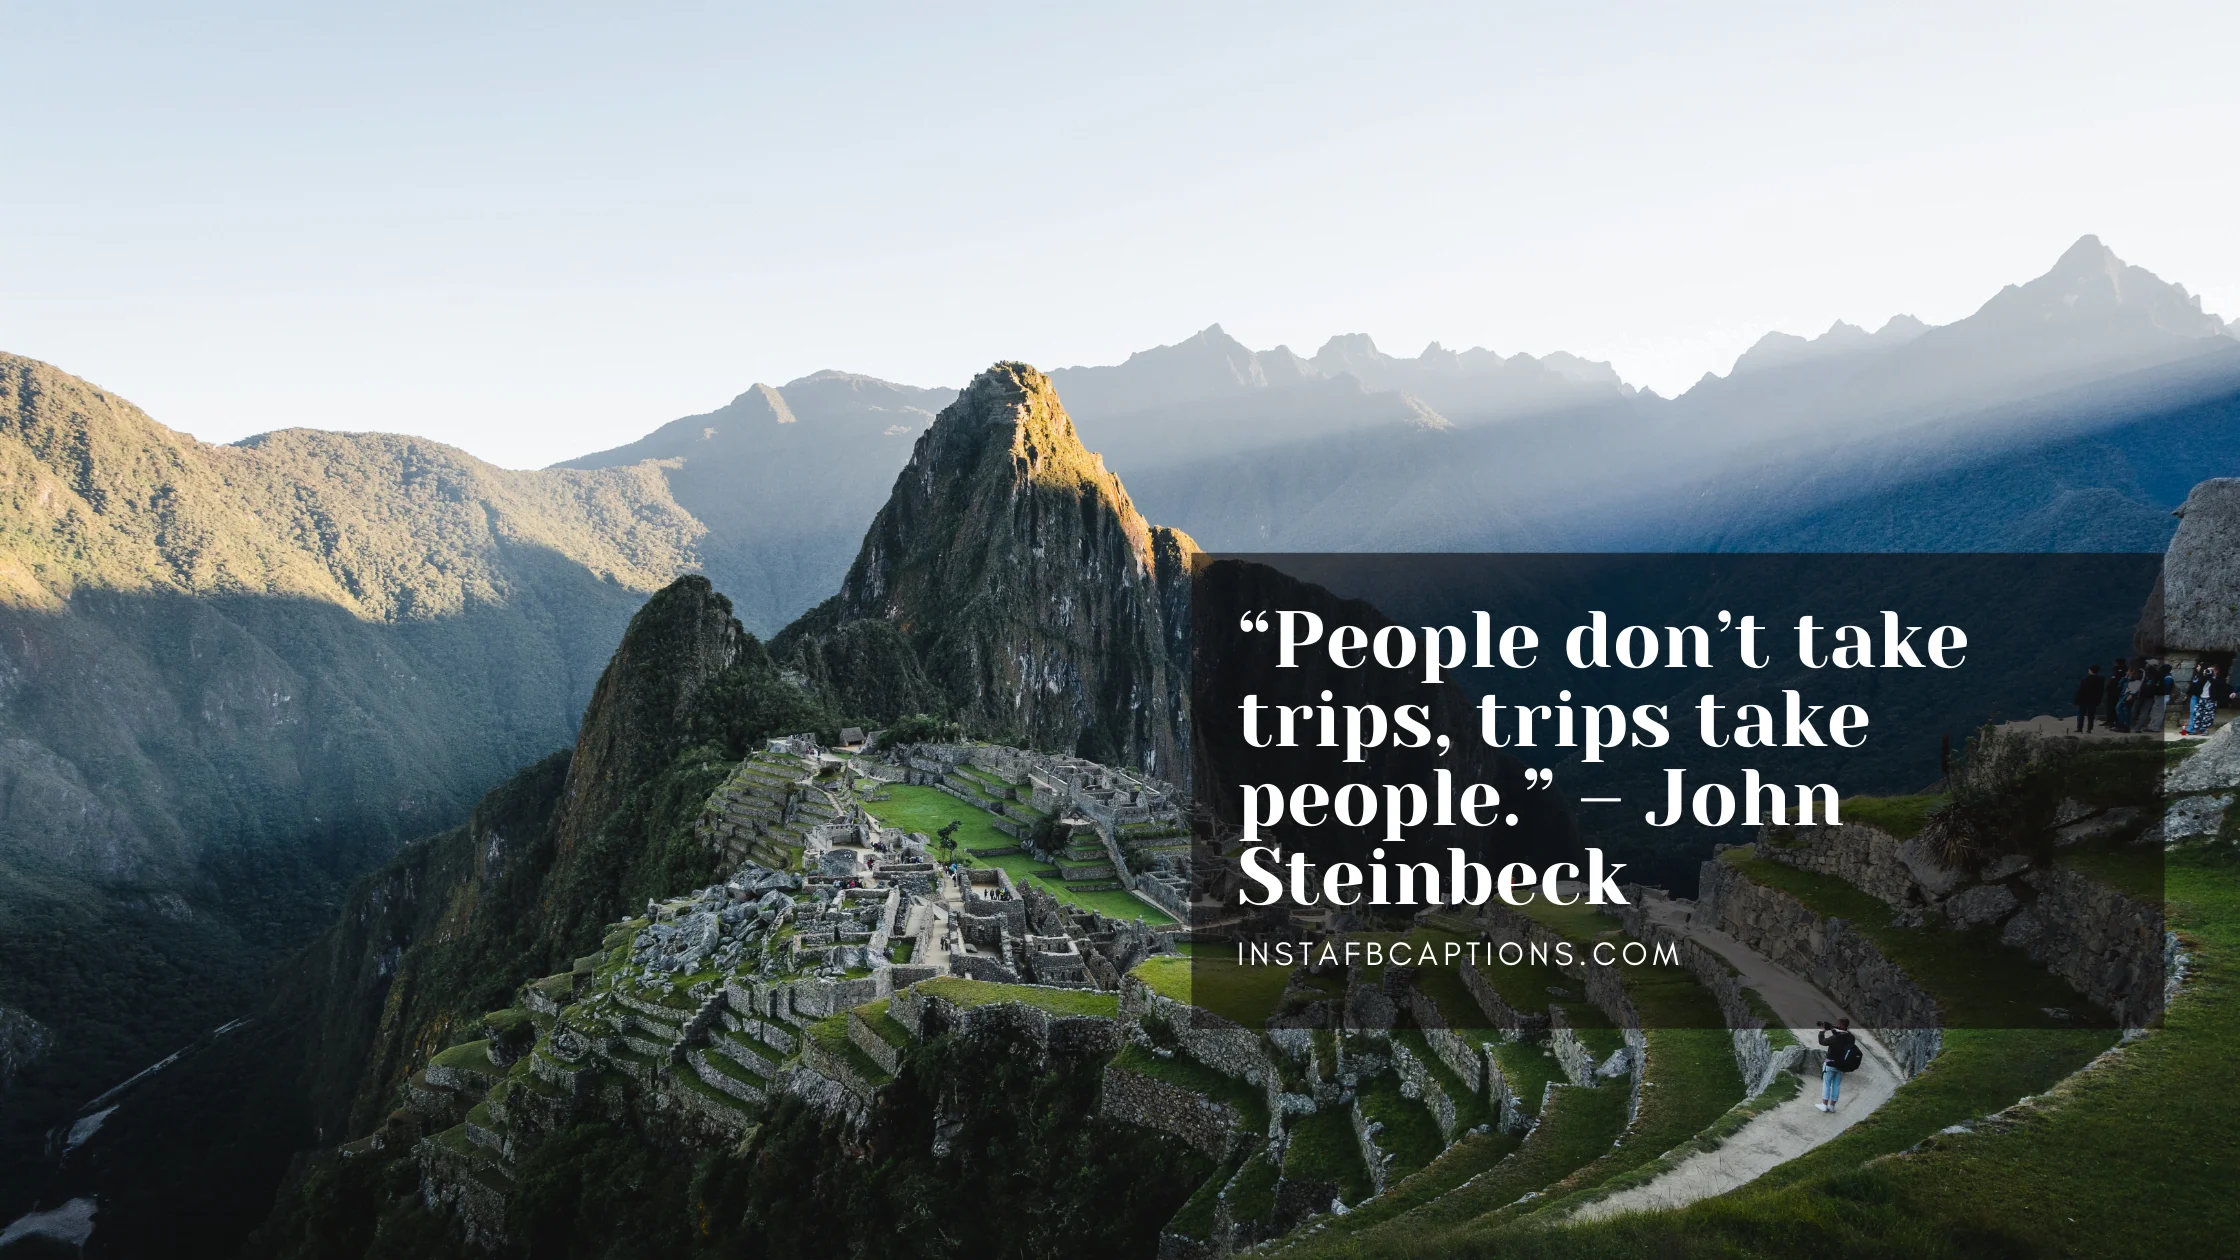 Machu Picchu Quotes For Instagram Captions  - Machu Picchu Quotes for Instagram Captions - Machu Picchu Instagram Captions in 2023